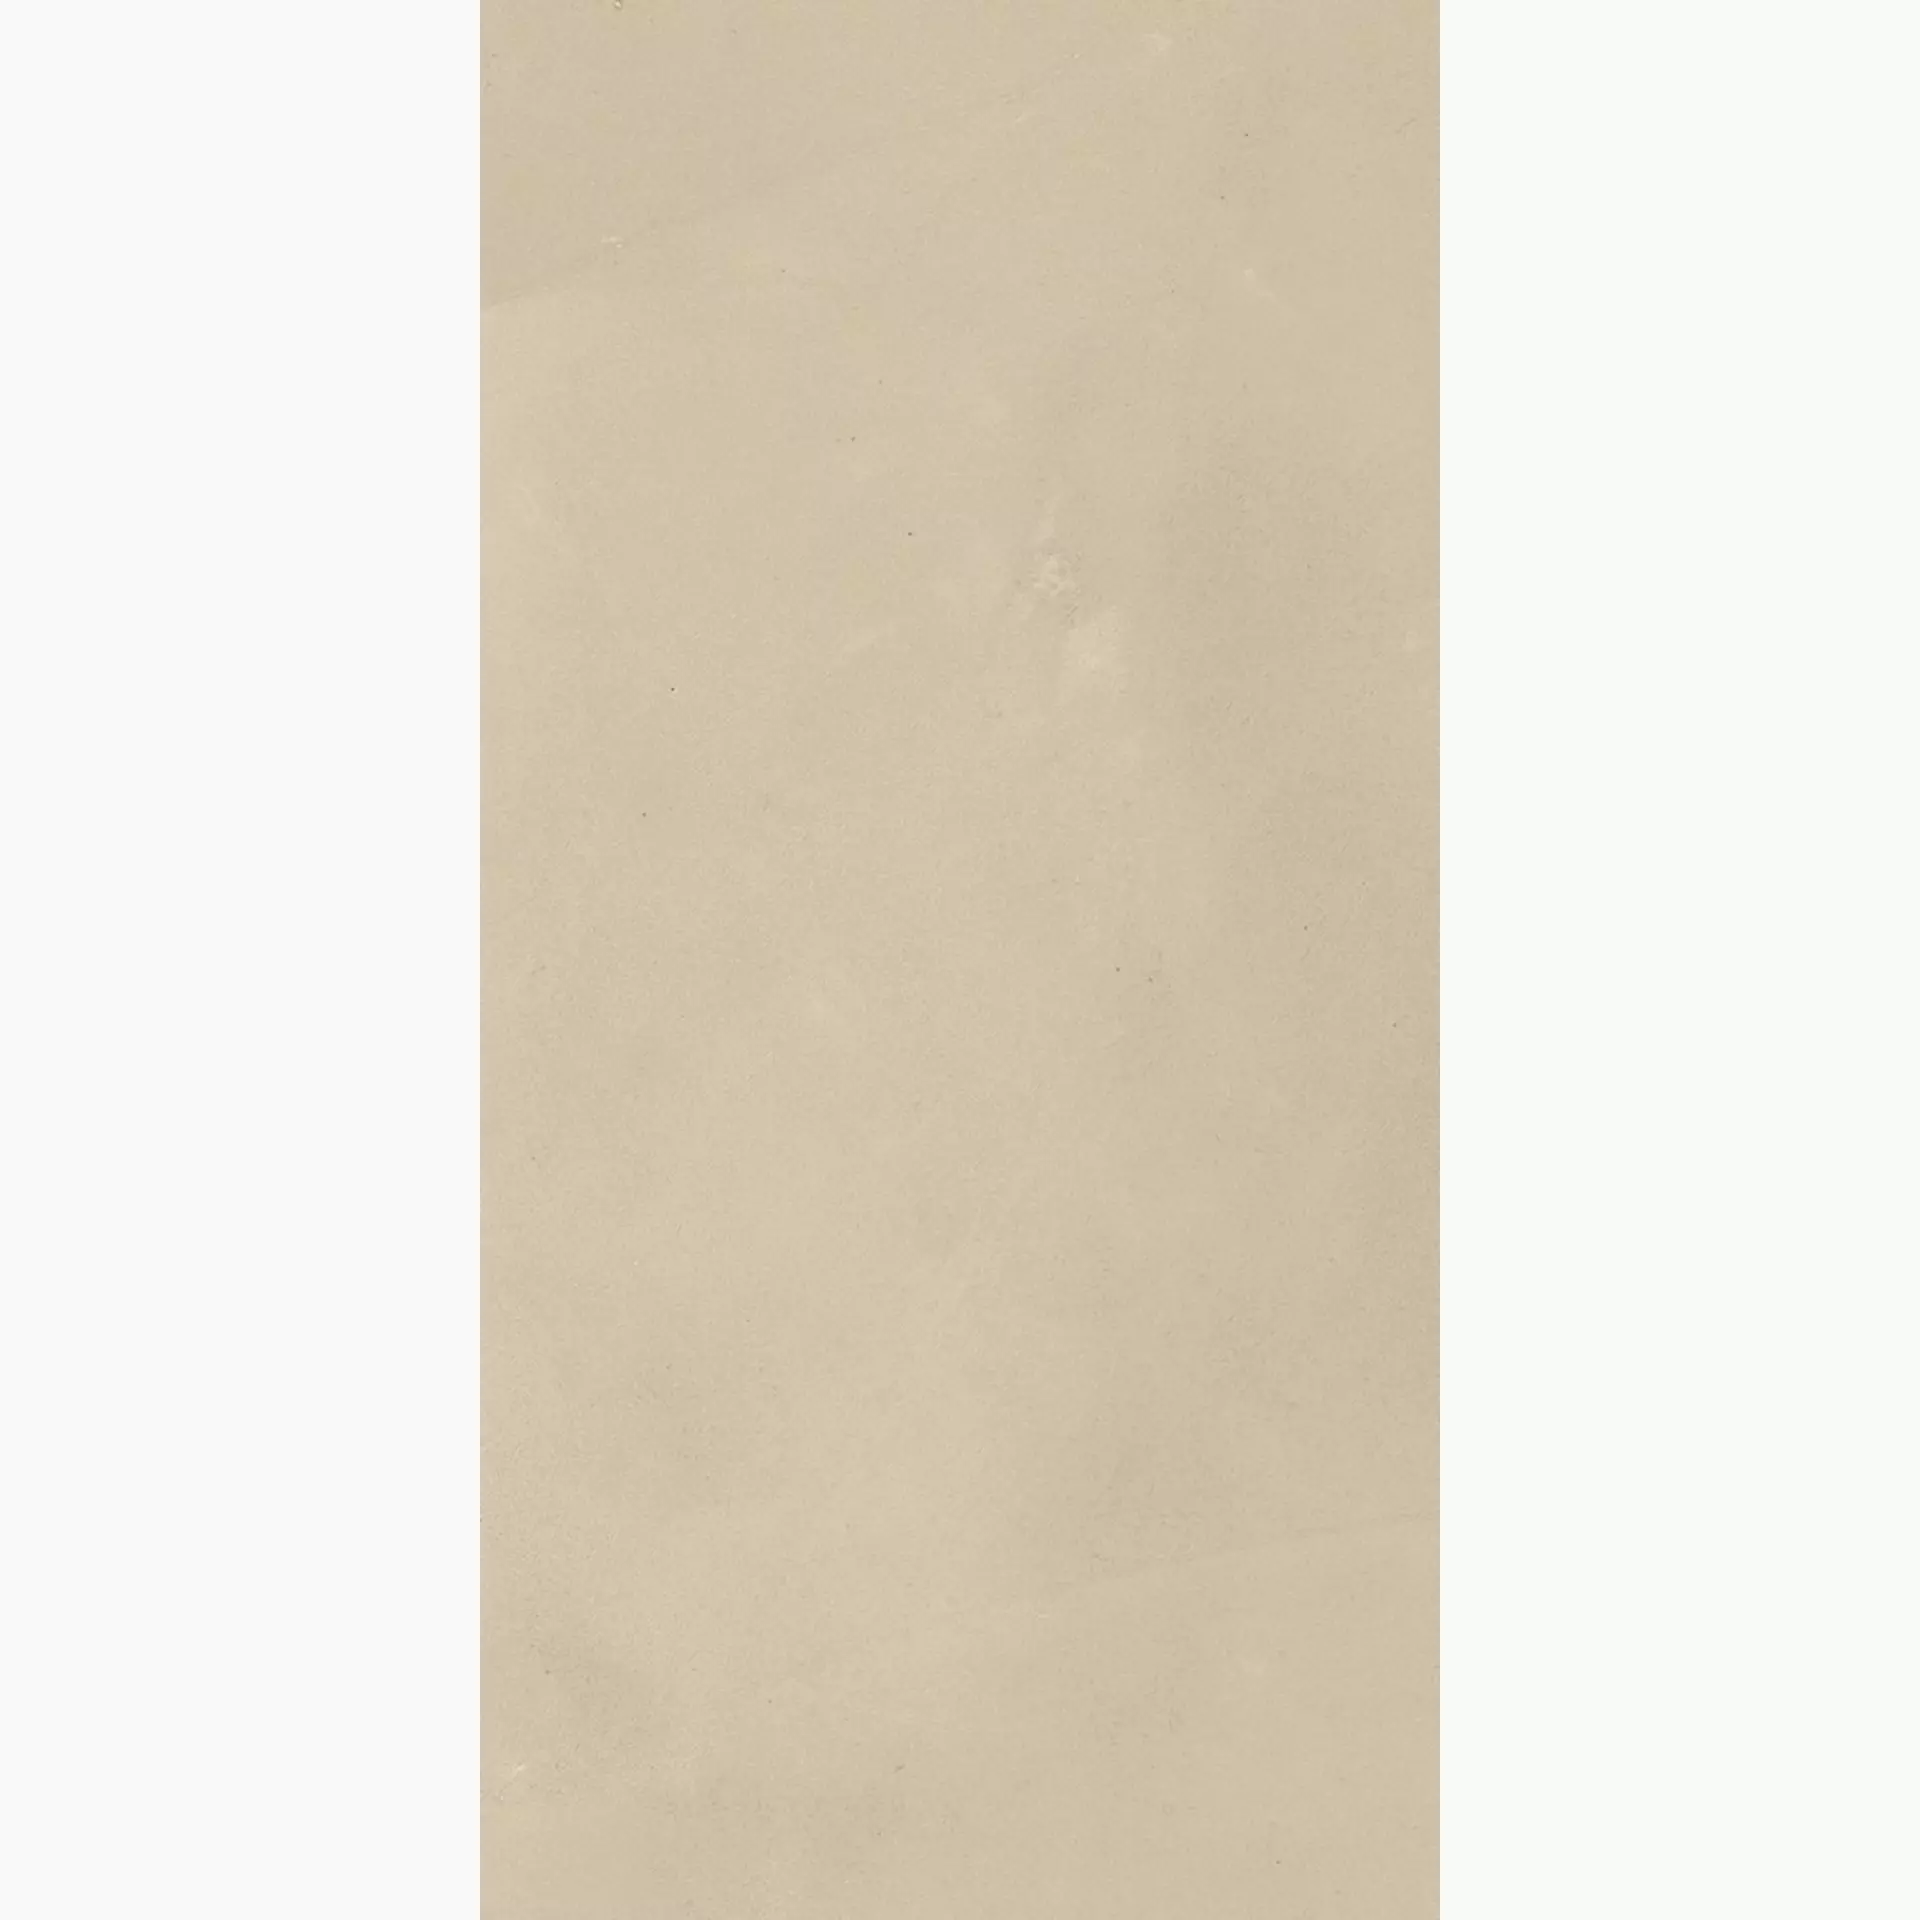 Mirage Clay Cl 06 Shy Naturale Stair plate A ARS1 30x60cm 9mm